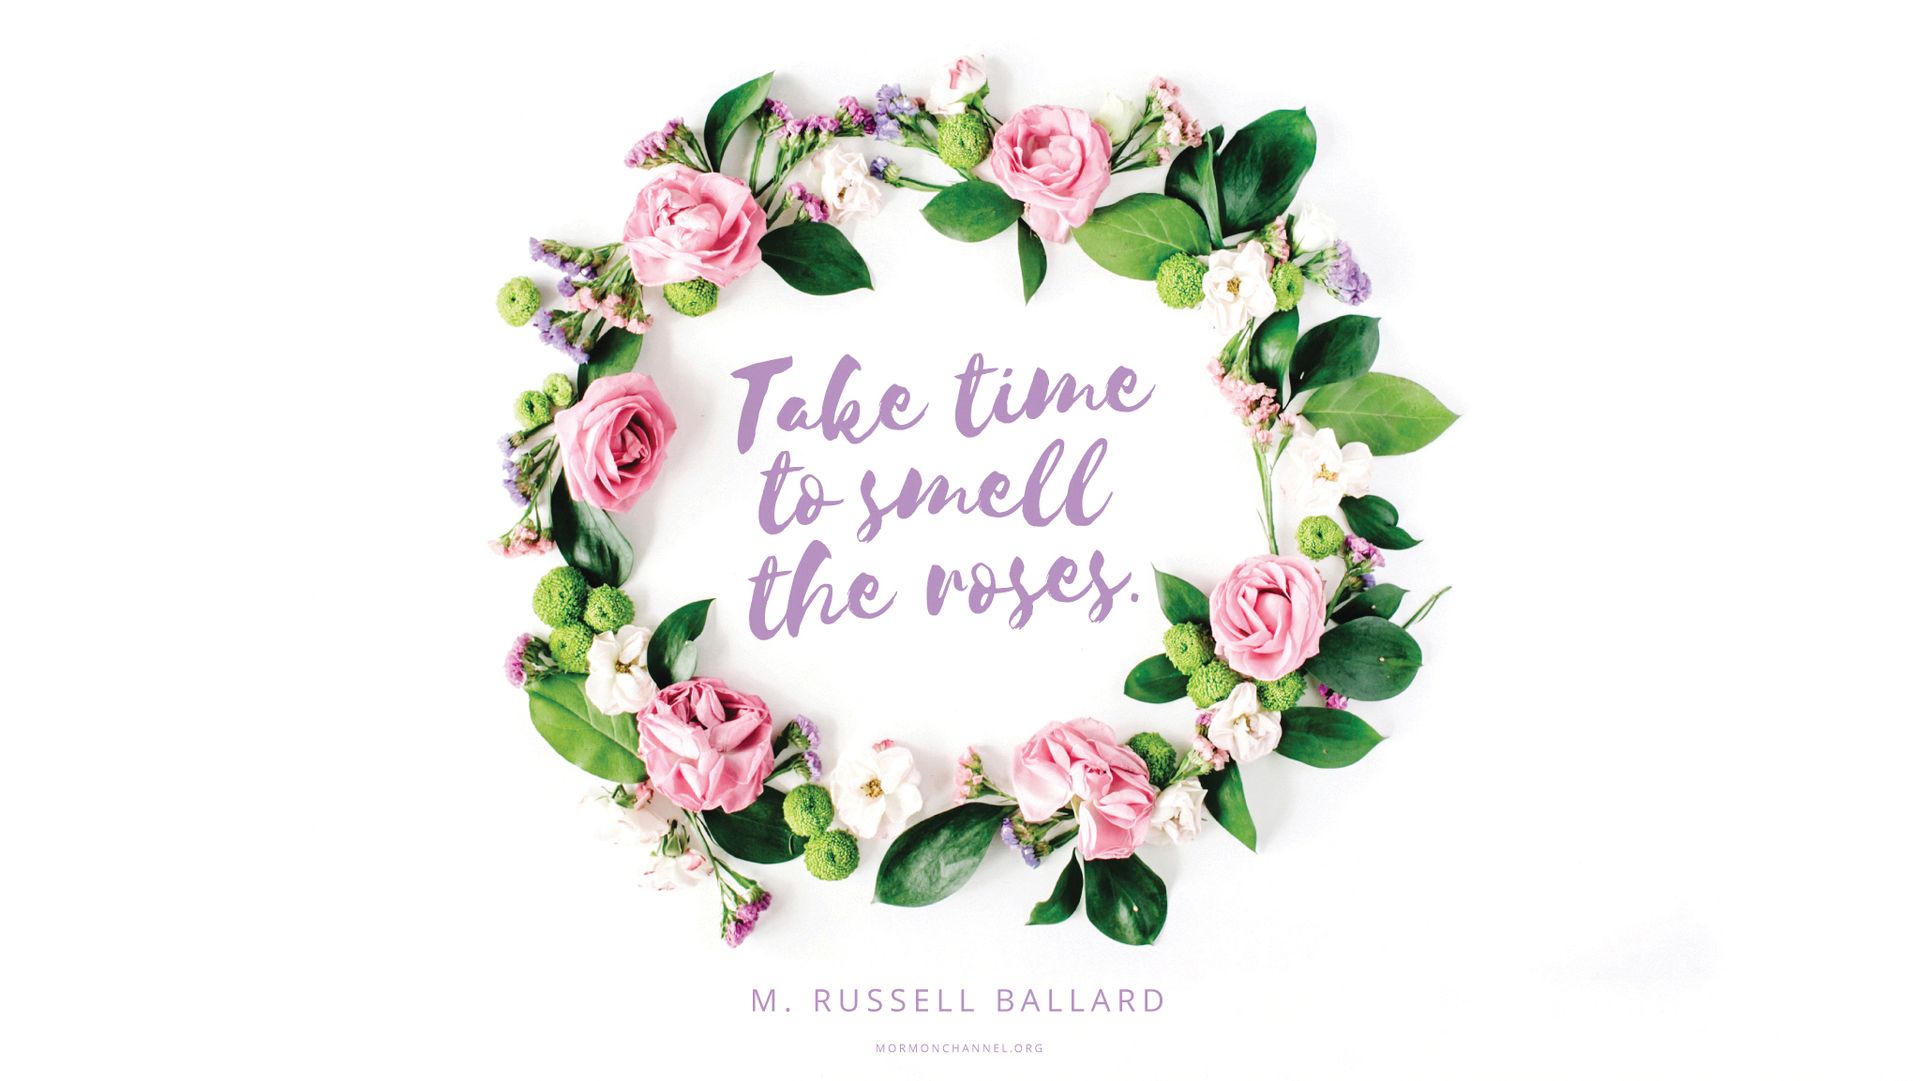 “Take time to smell the roses.”—Elder M. Russell Ballard, “God’s Love for His Children”